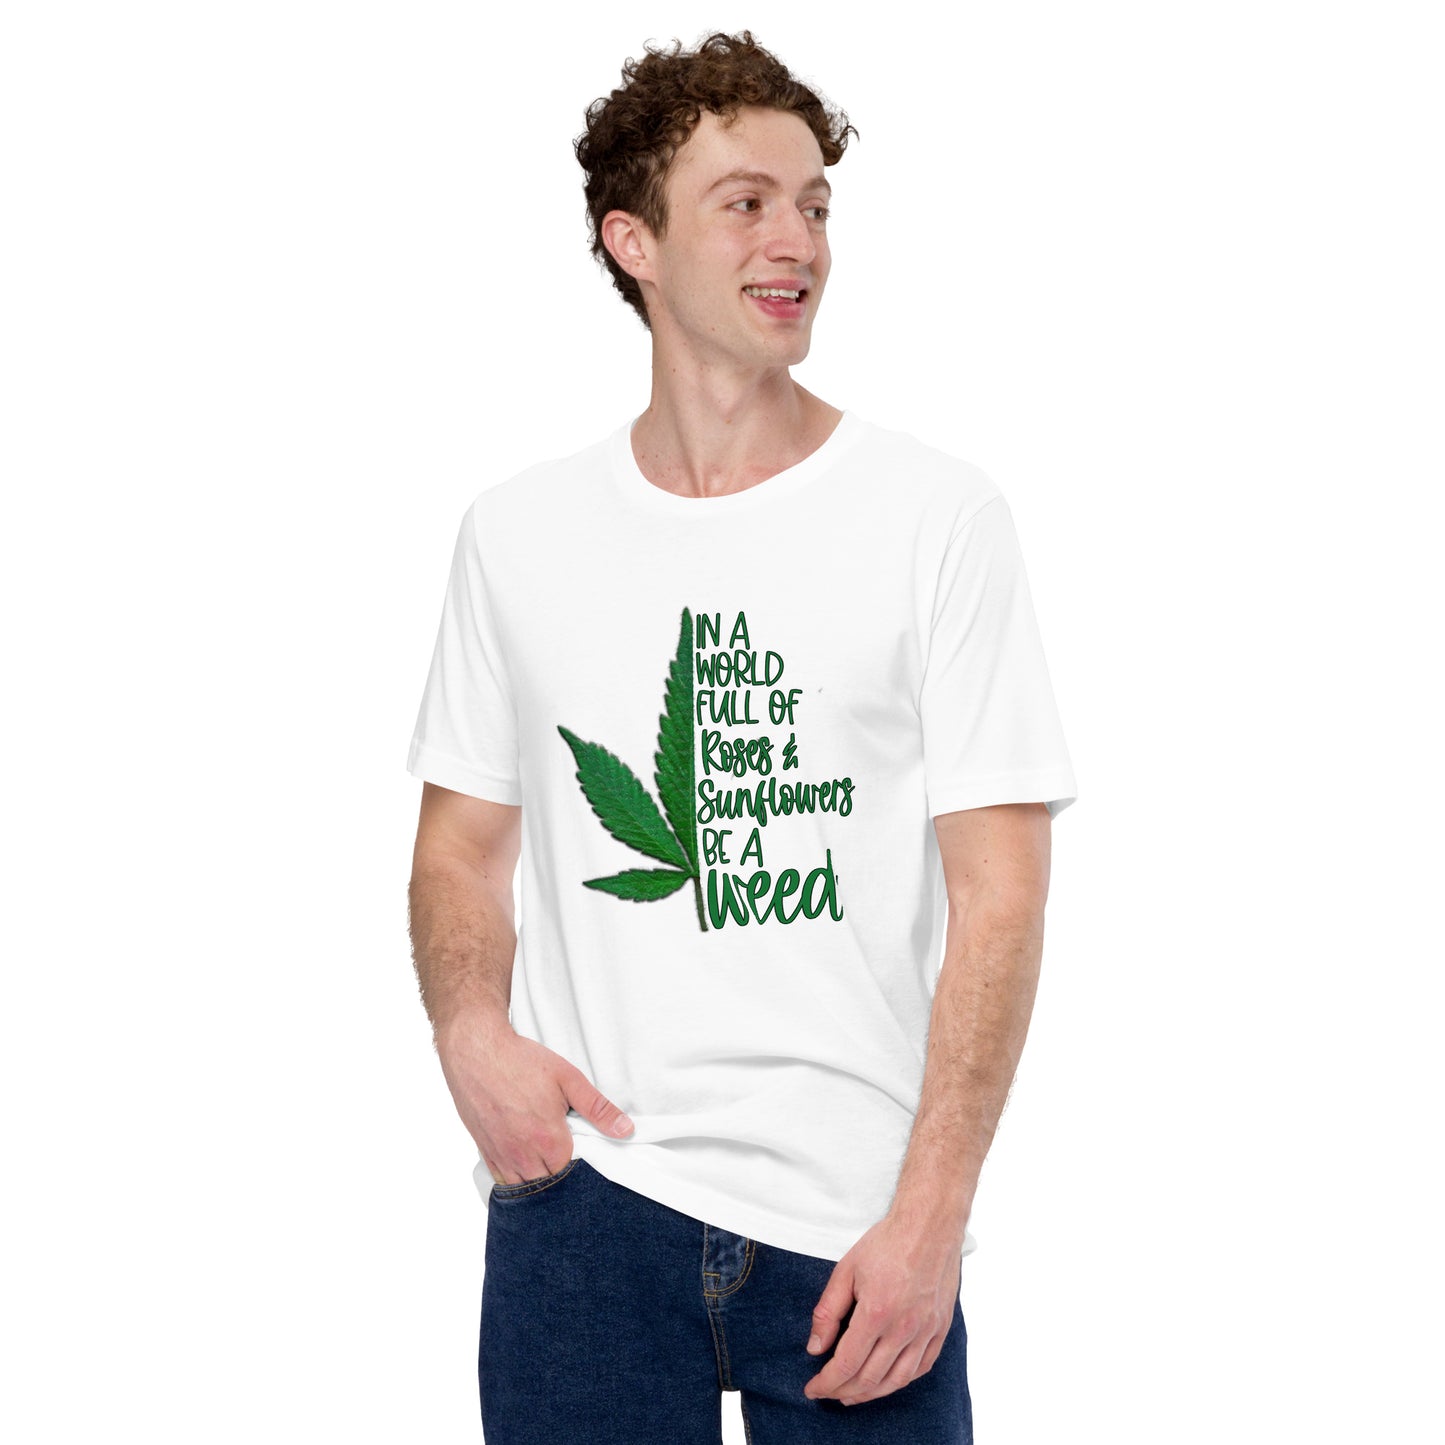 BE A WEED- Unisex t-shirt